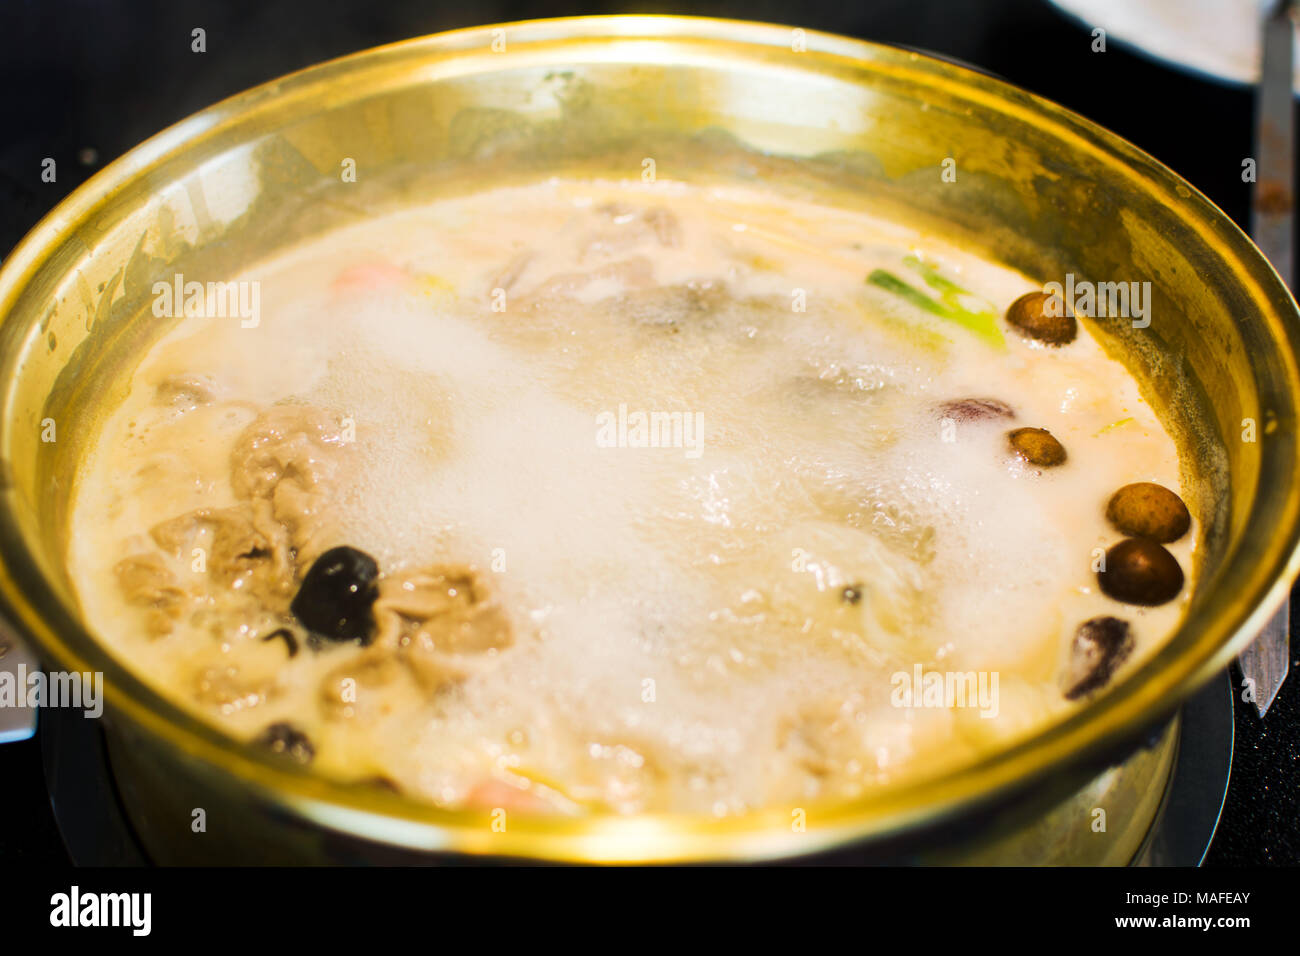 Boiling hotpot close up with many ingredients Stock Photo